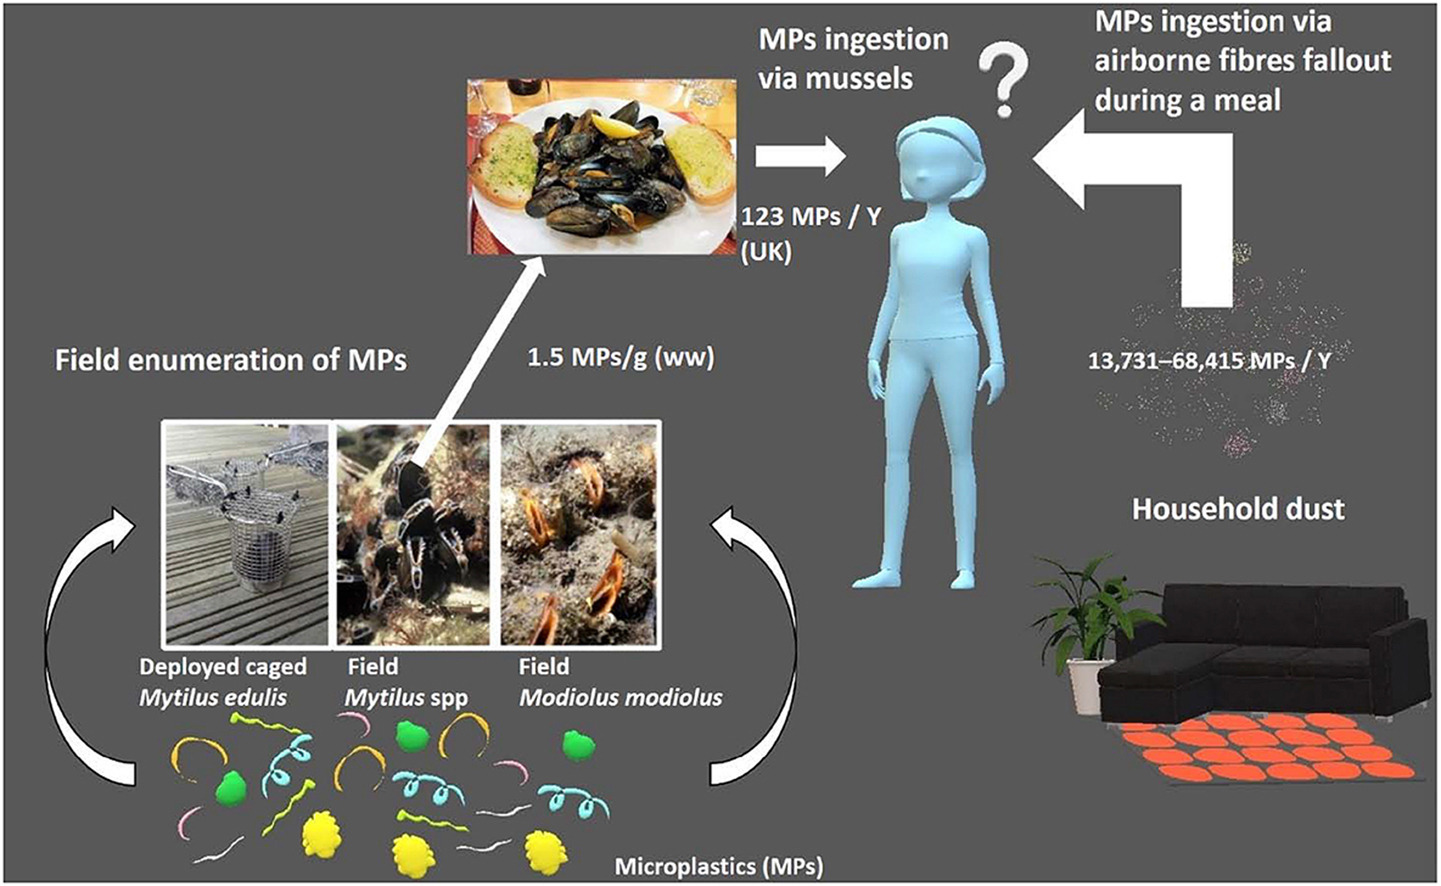 Low levels of microplastics in wild mussels compared to exposure via household fibres fallout during a meal